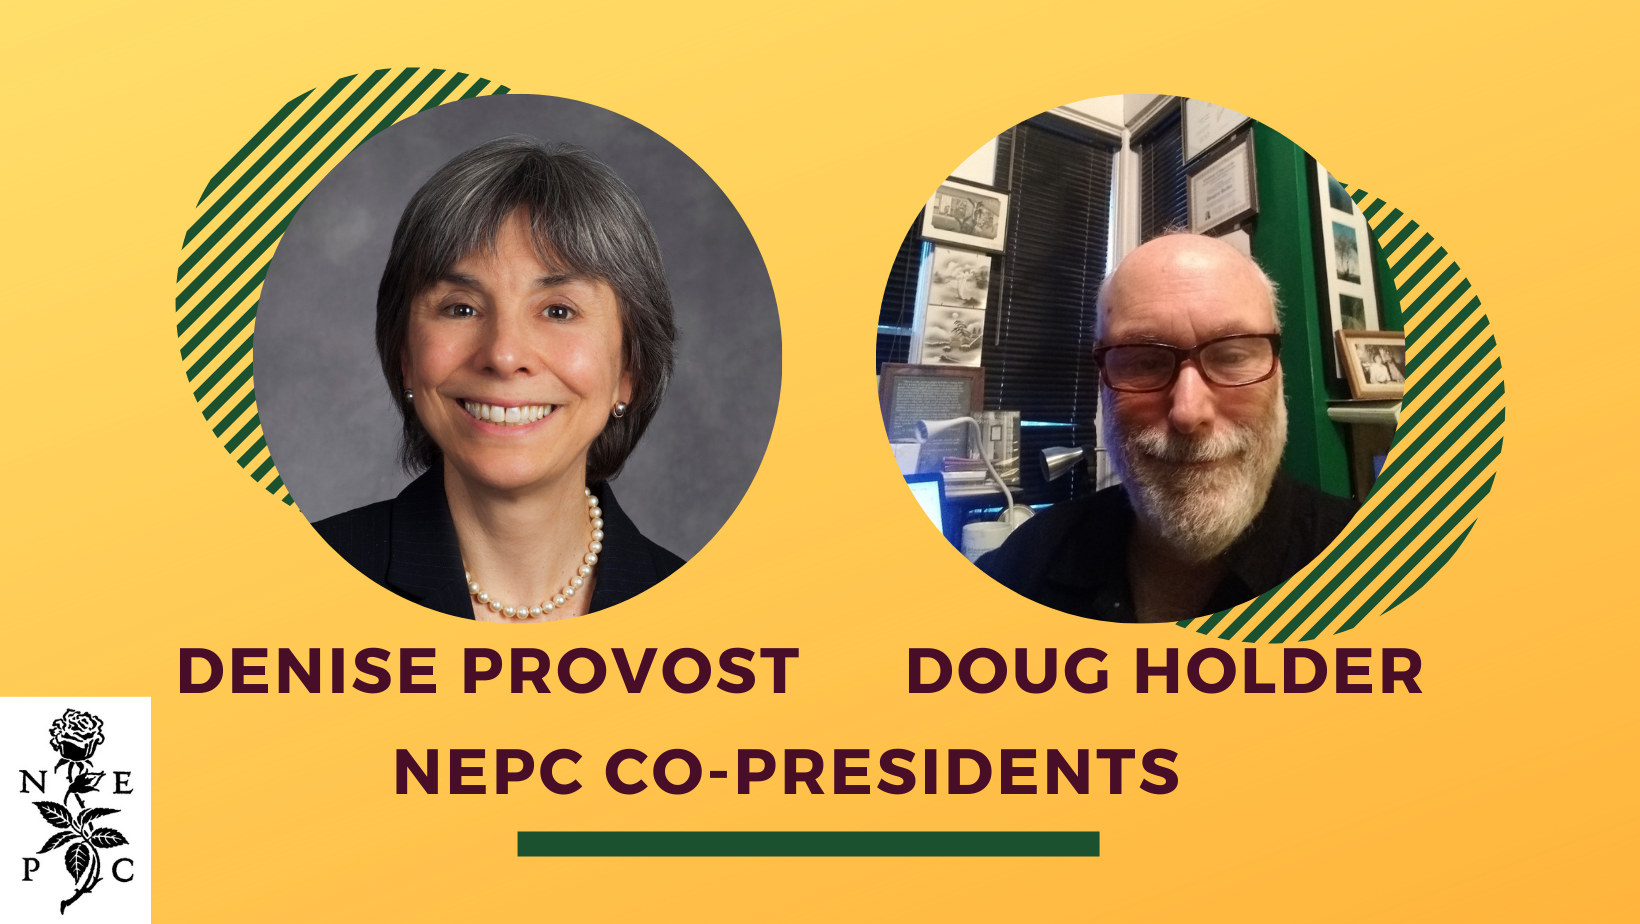 Introducing New NEPC Co-Presidents